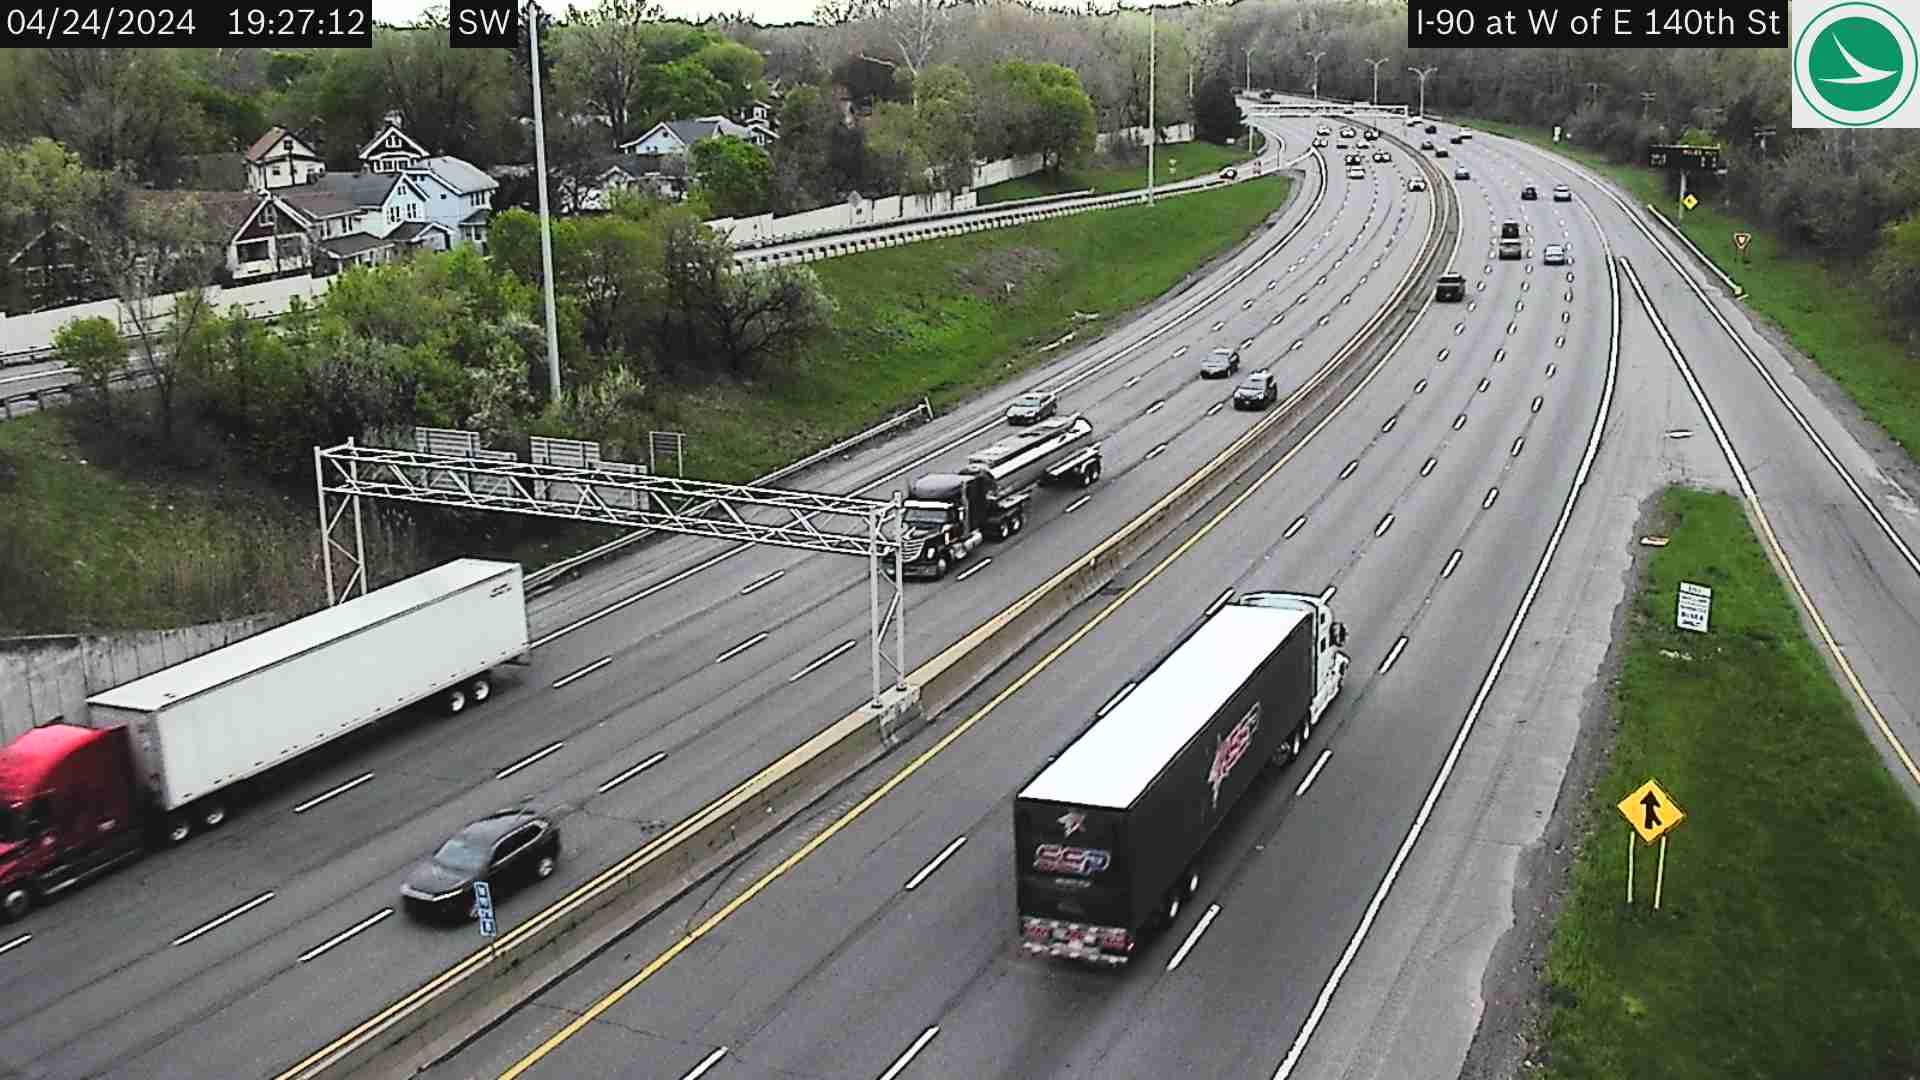 Traffic Cam East Cleveland: I-90 at W of E 140th St Player